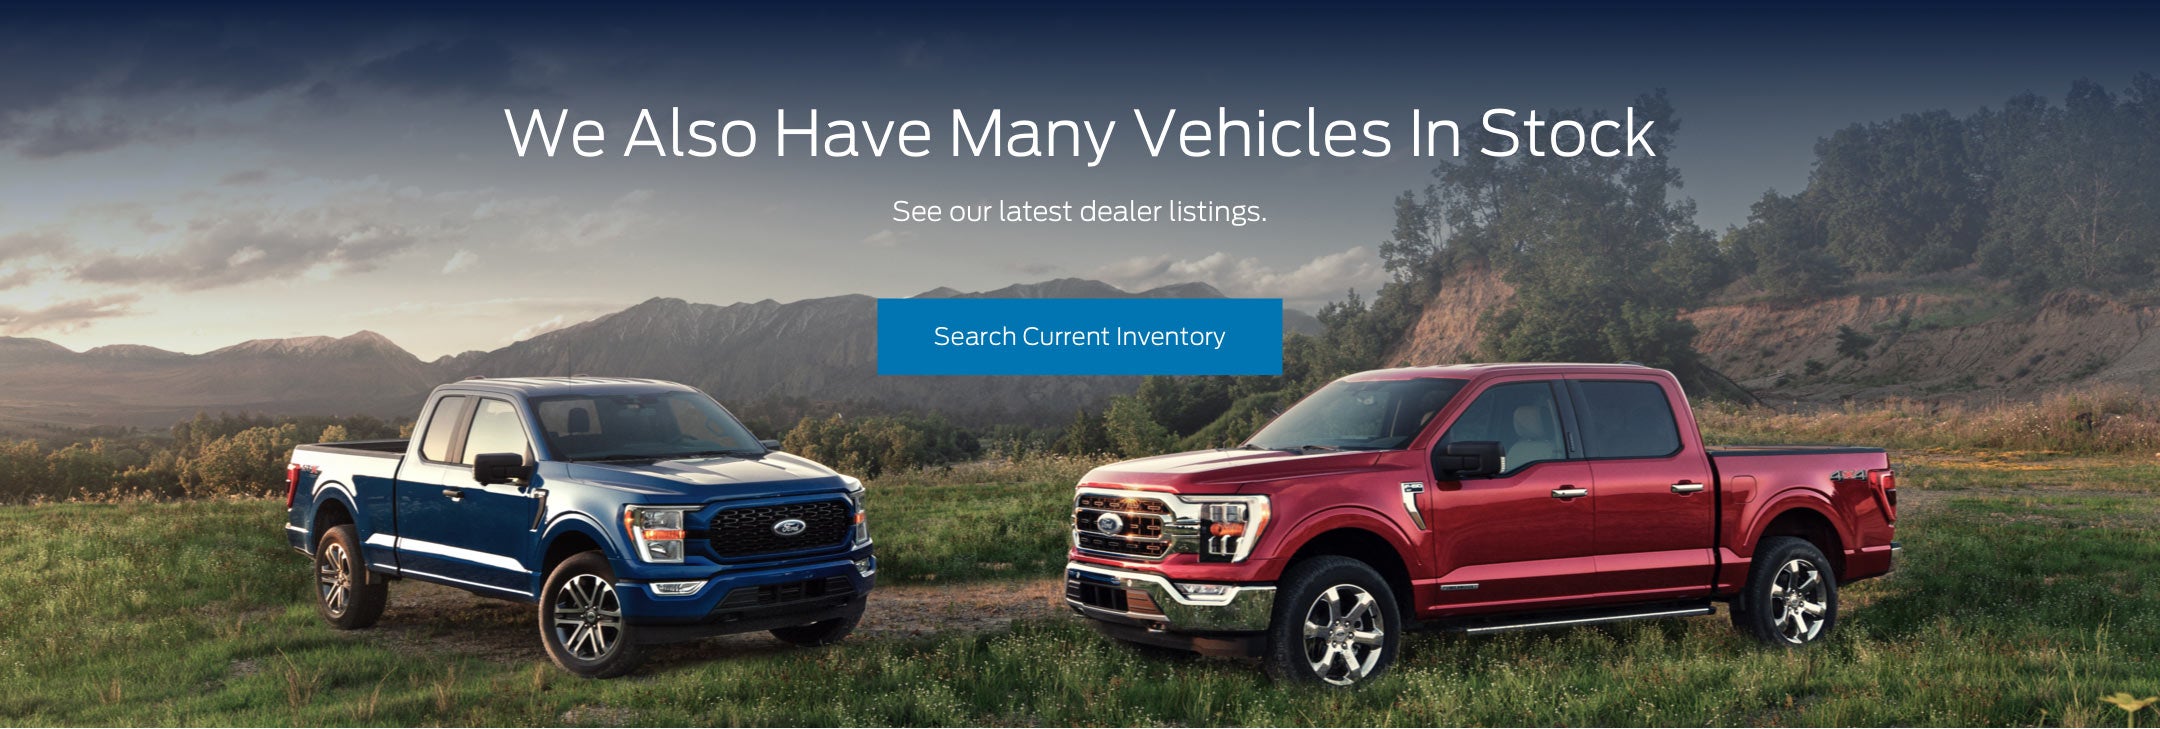 Ford vehicles in stock | Academy Ford in Laurel MD